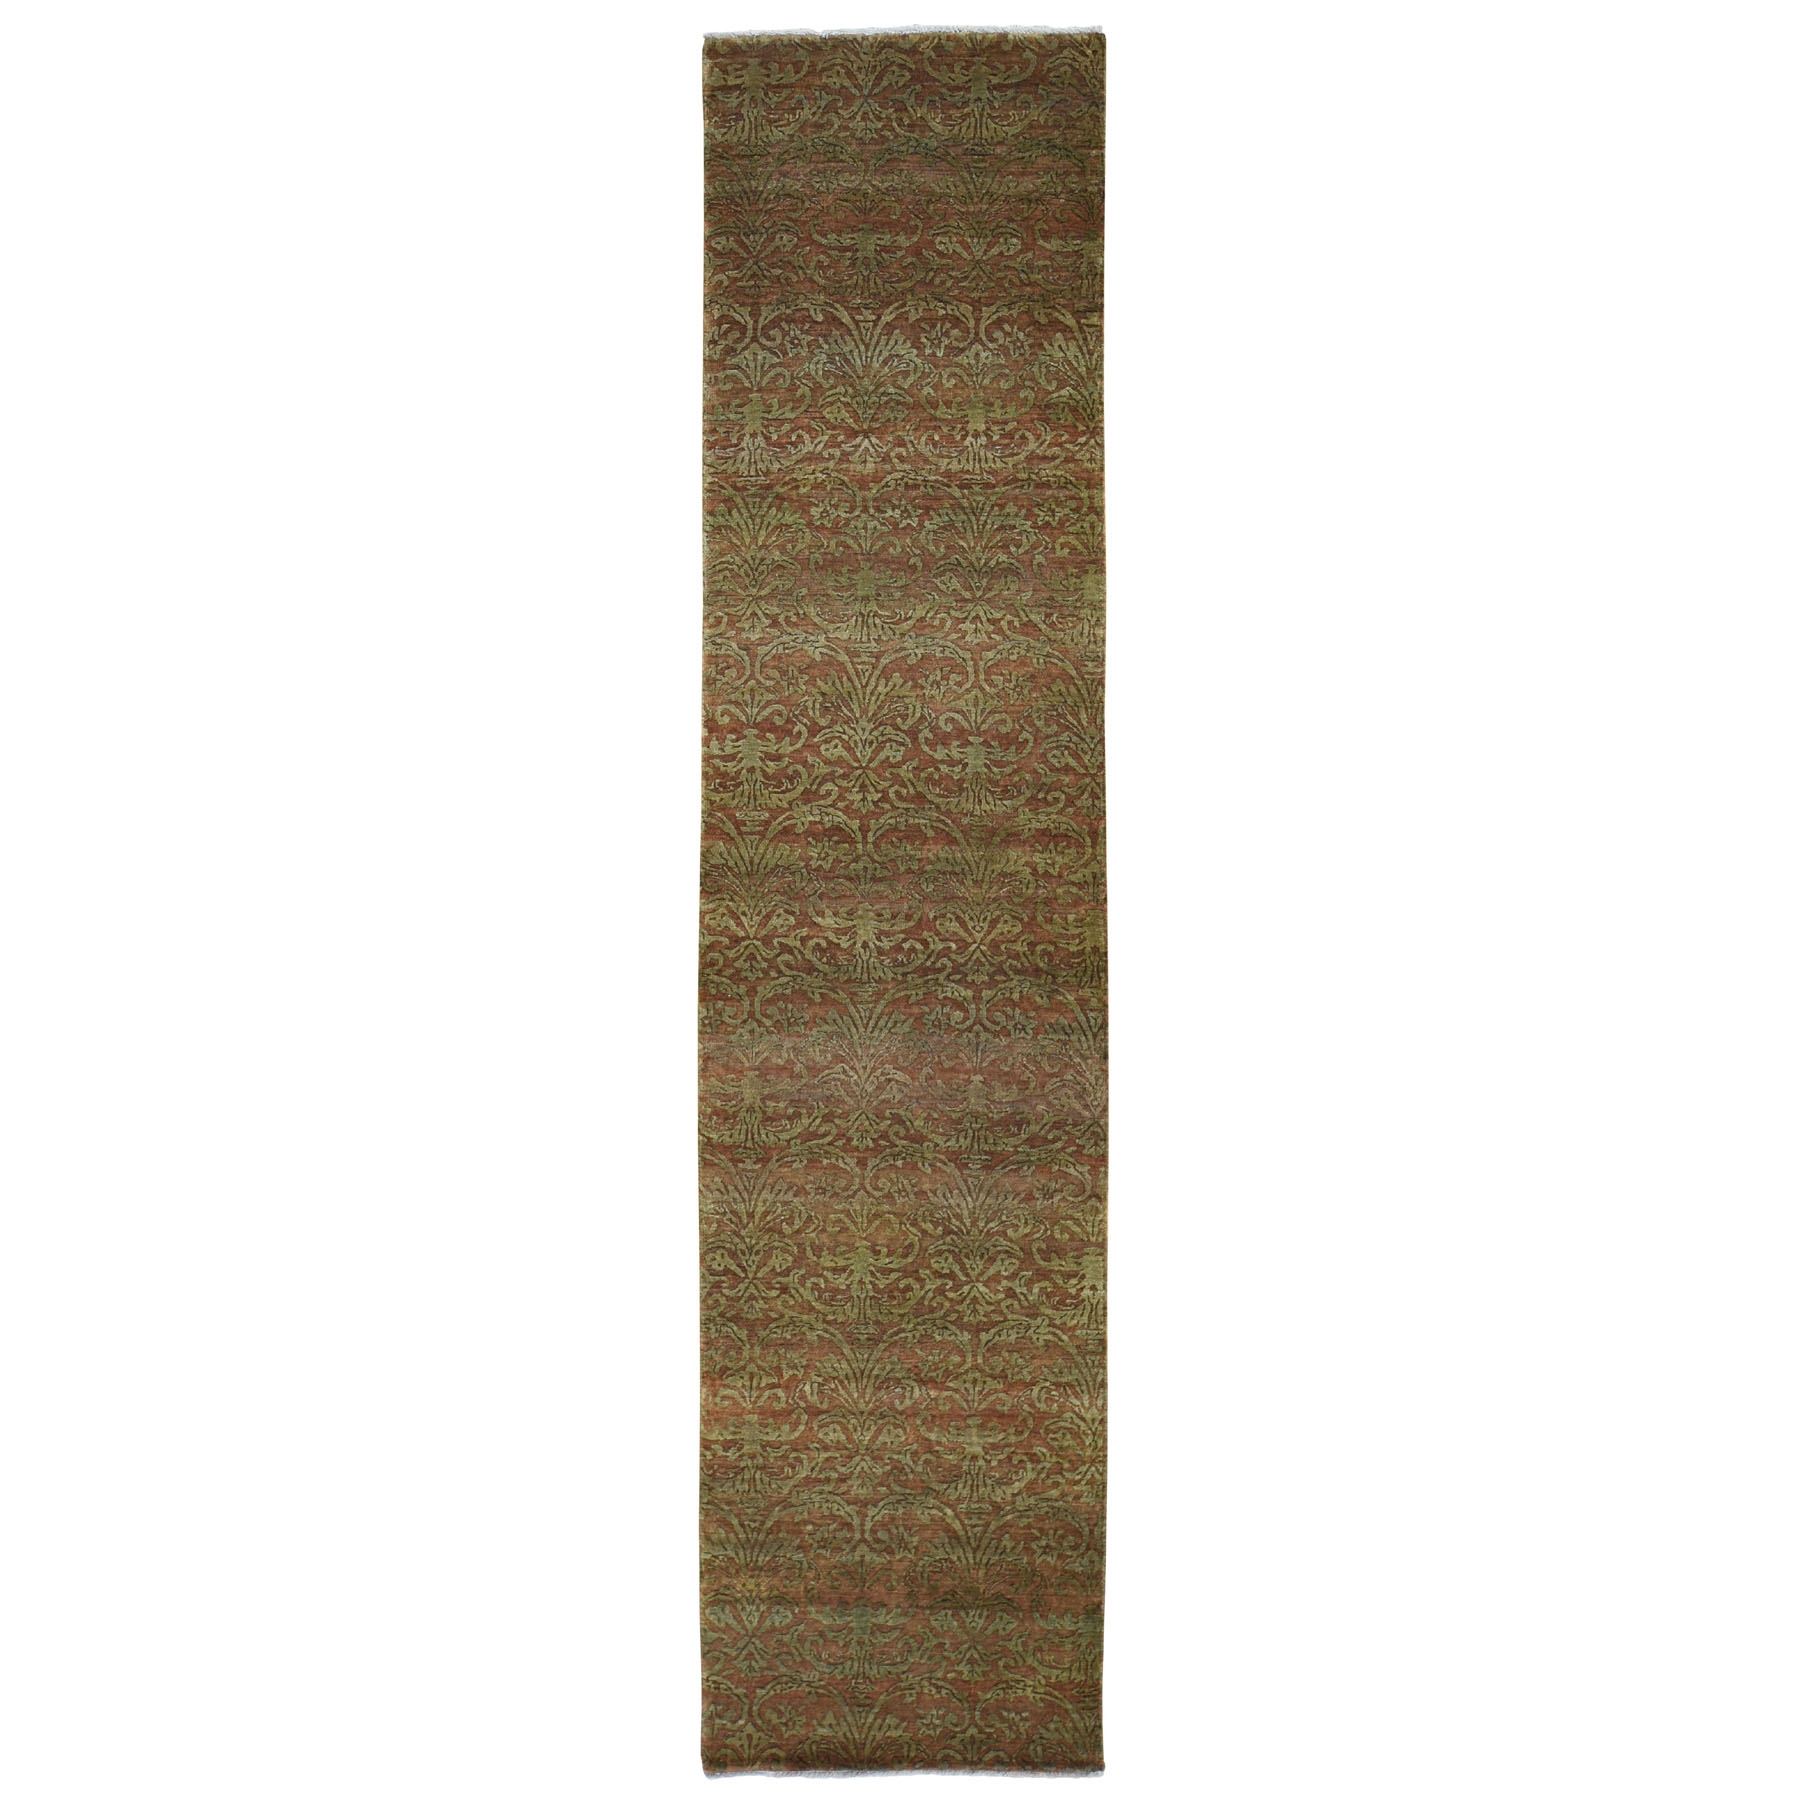 2'5"x11'4" Brown Damask Wool and Silk Tone on Tone Runner Hand Woven Oriental Rug 